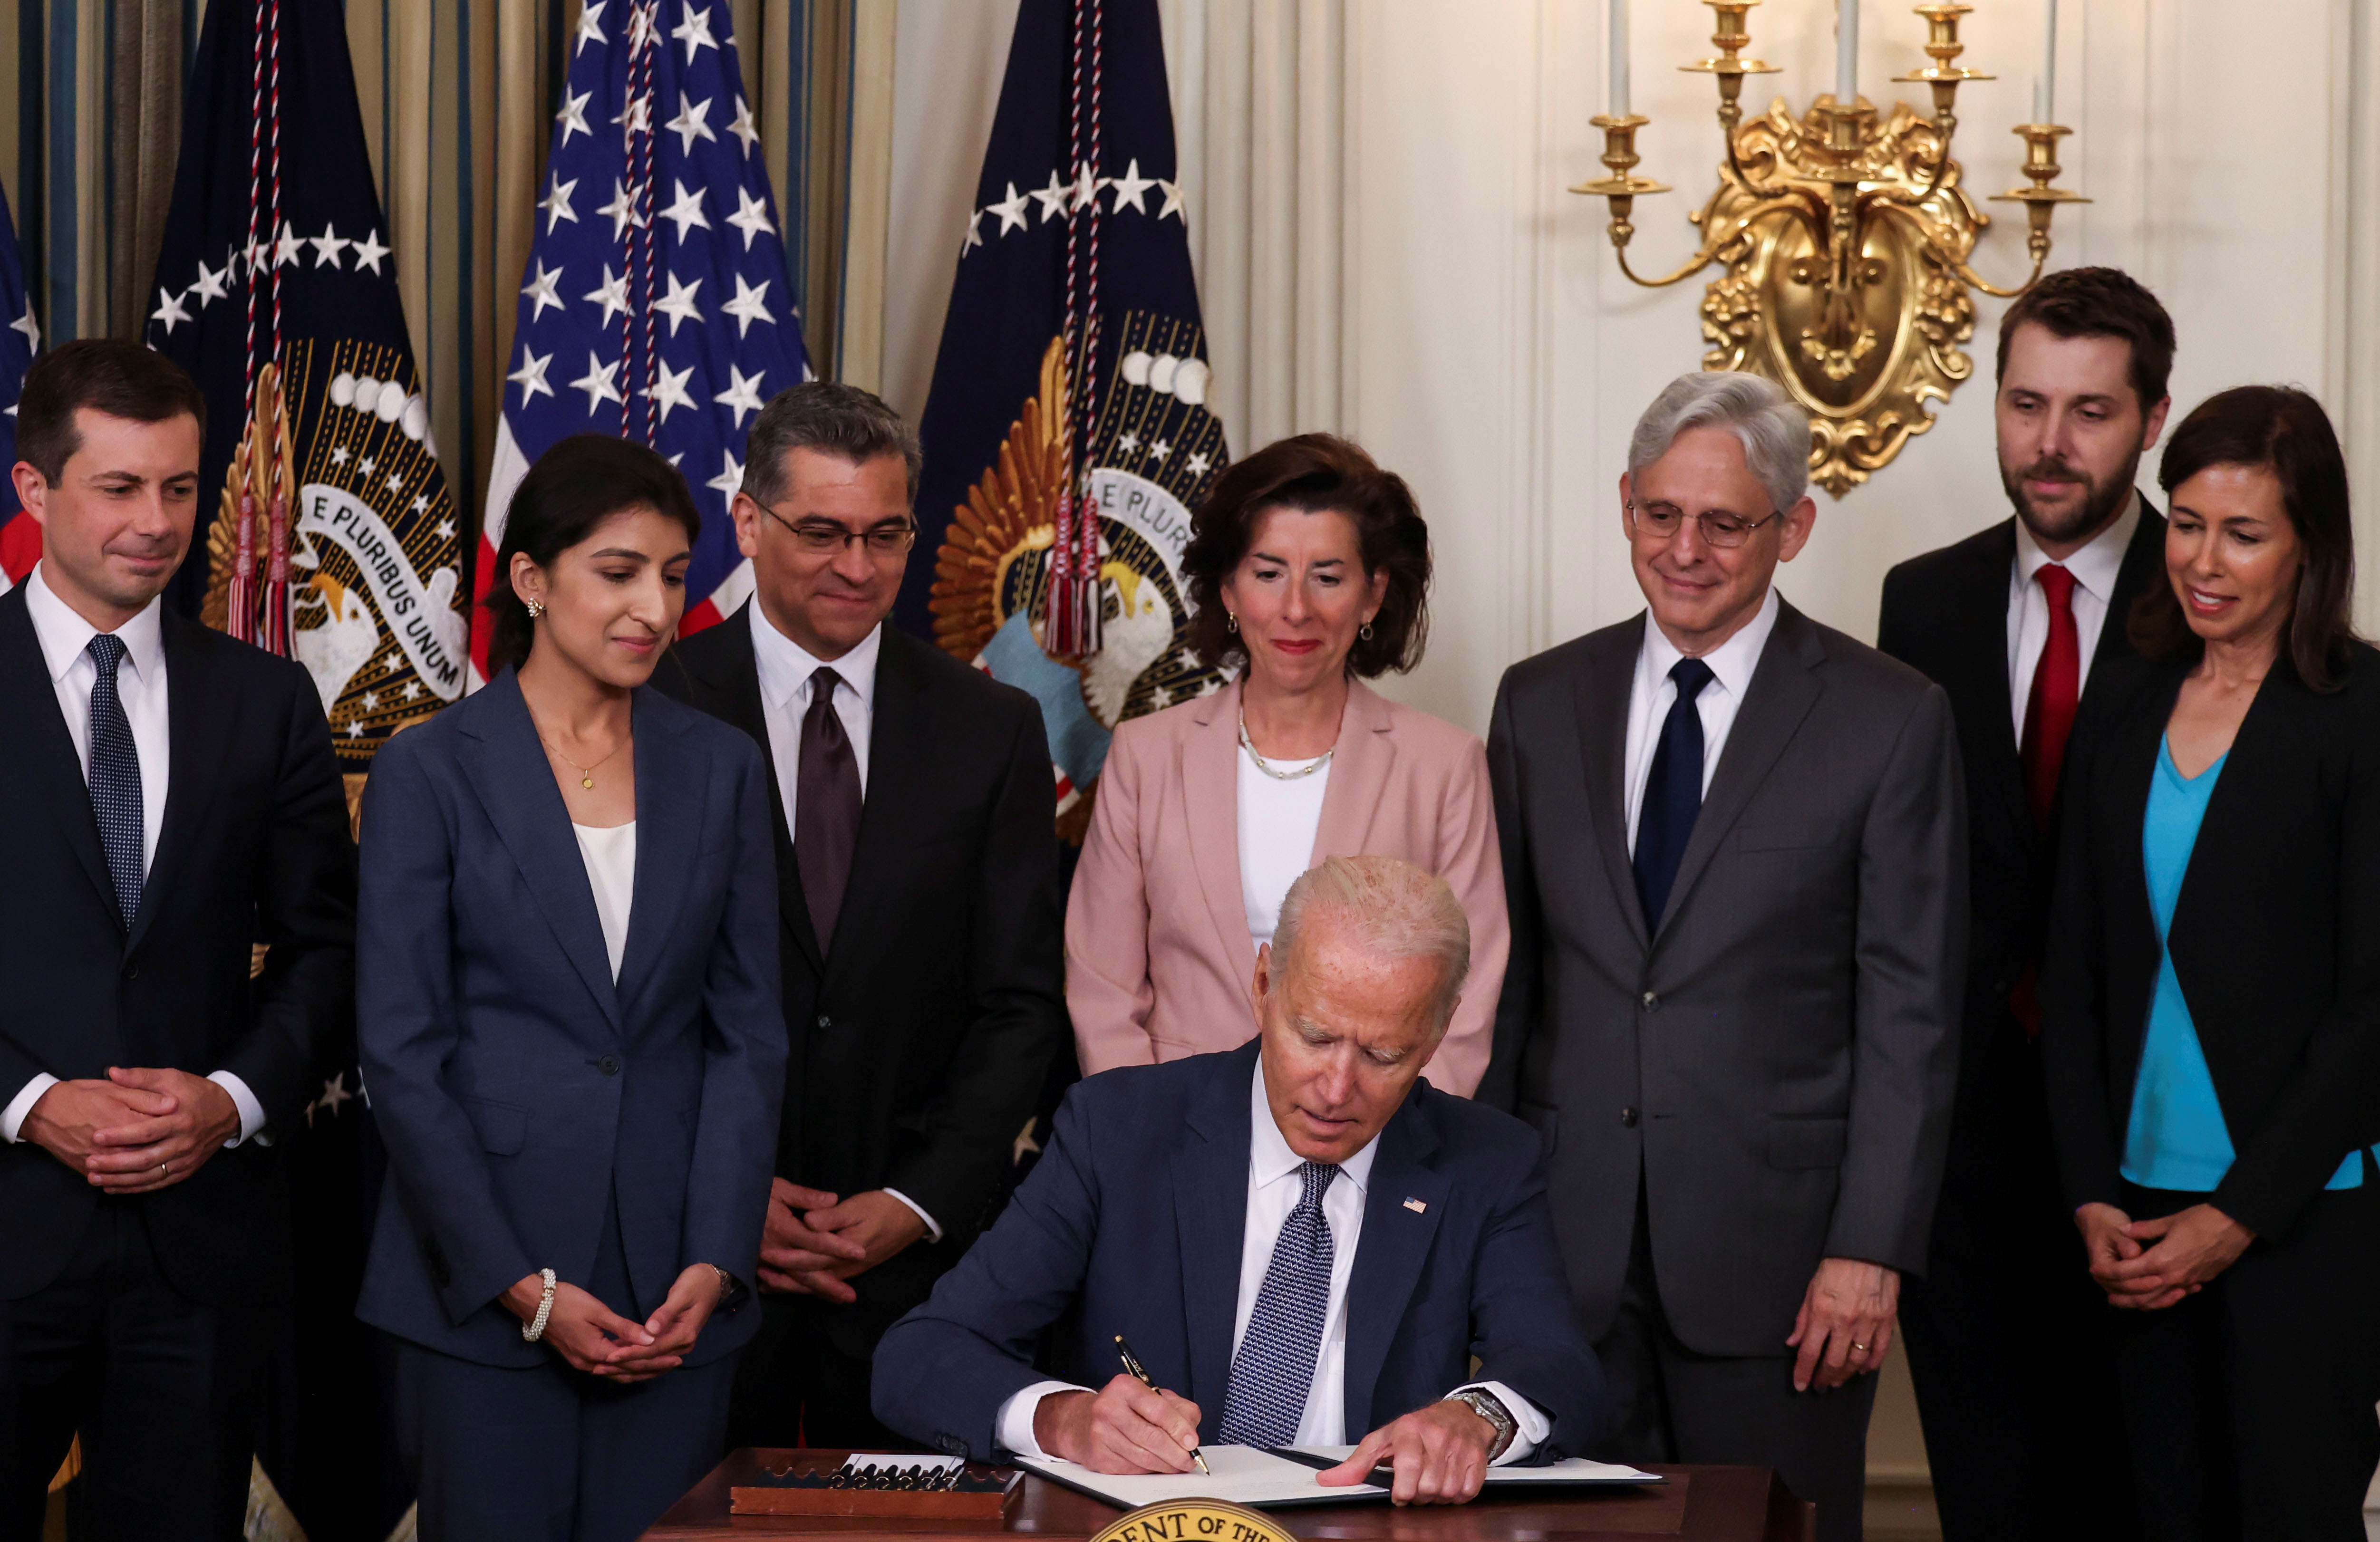  U.S. President Joe Biden signs an executive order on "promoting competition in the American economy" as members of his Cabinet standby during an event in the State Dining Room at the White House in Washington U.S., July 9, 2021. REUTERS/Evelyn Hockstein